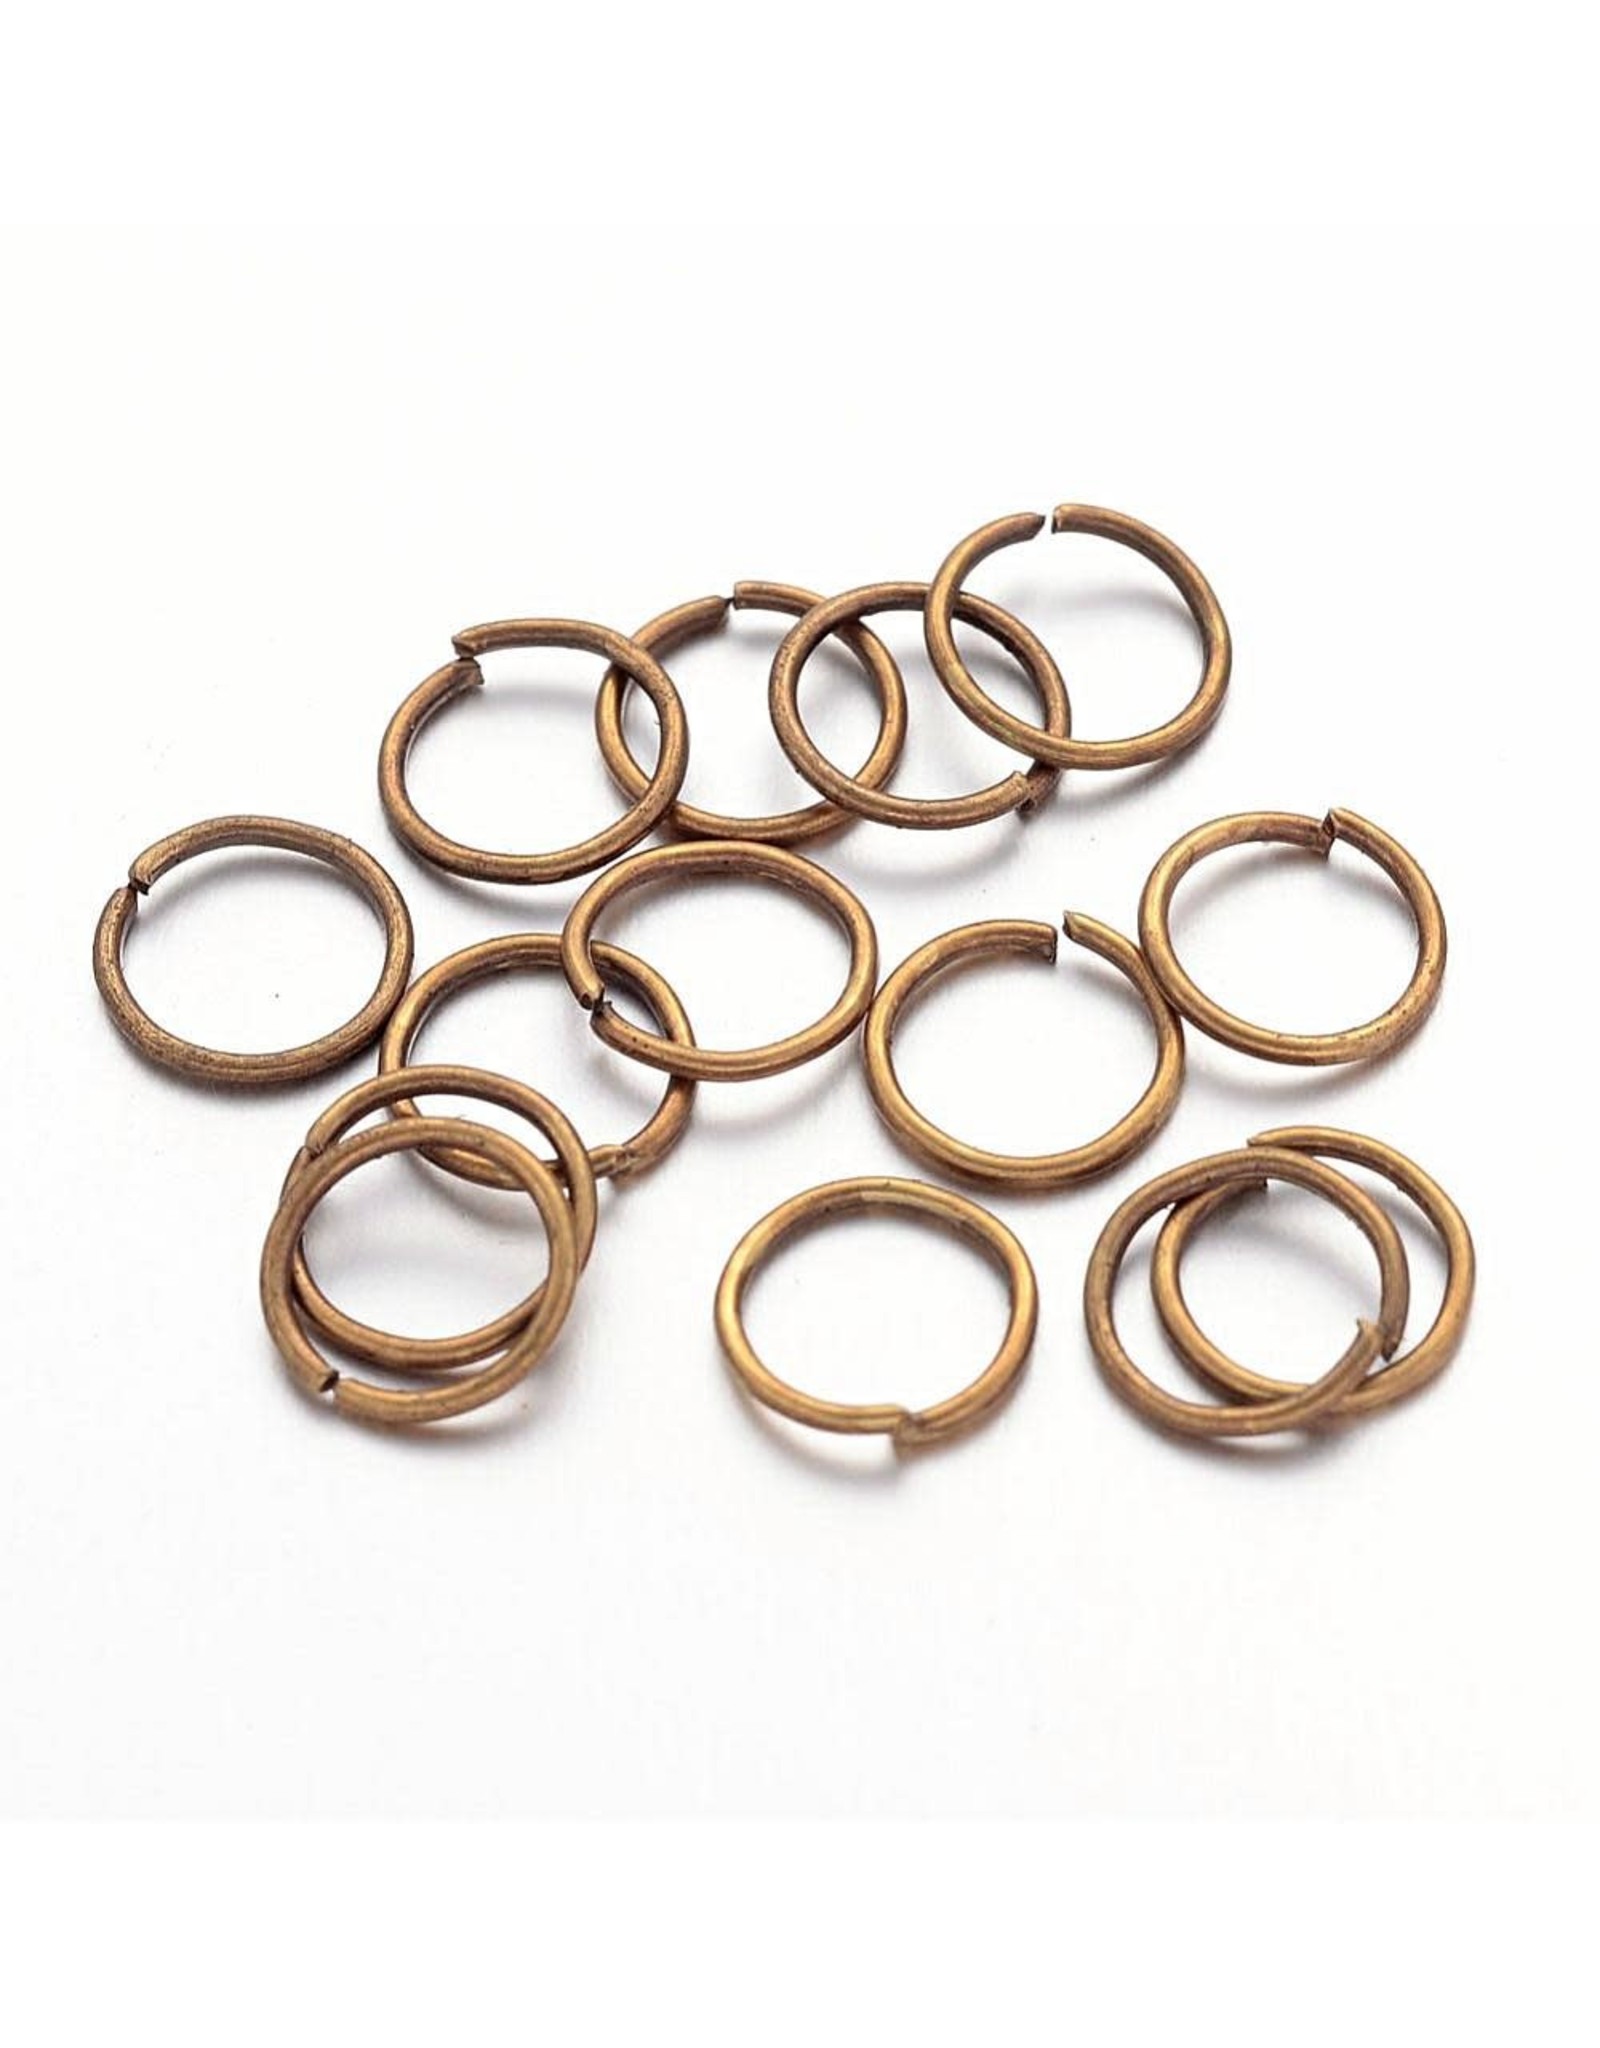 Jump Ring 7mm Antique Brass  approx 22g  x500 NF